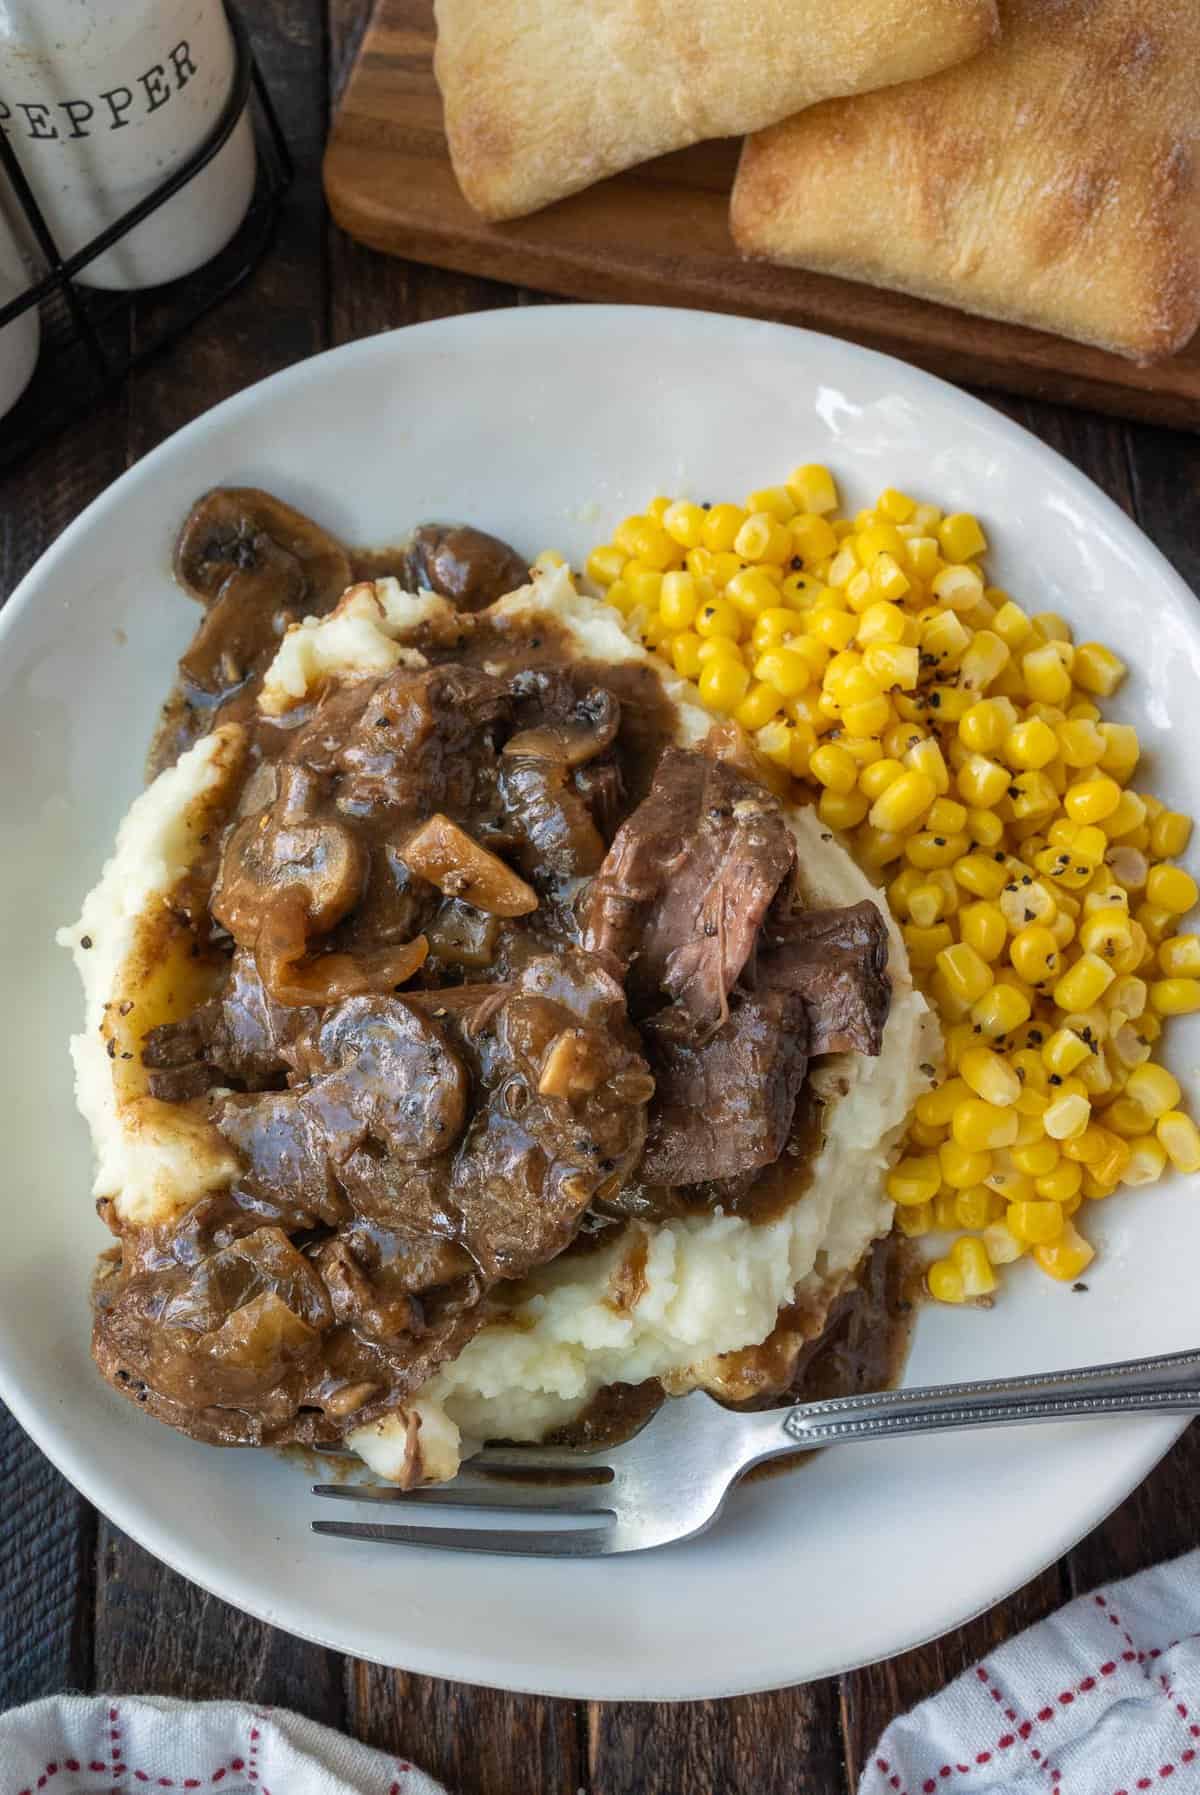 Sliced steak in gravy on top of mashed potatoes with a side of corn.